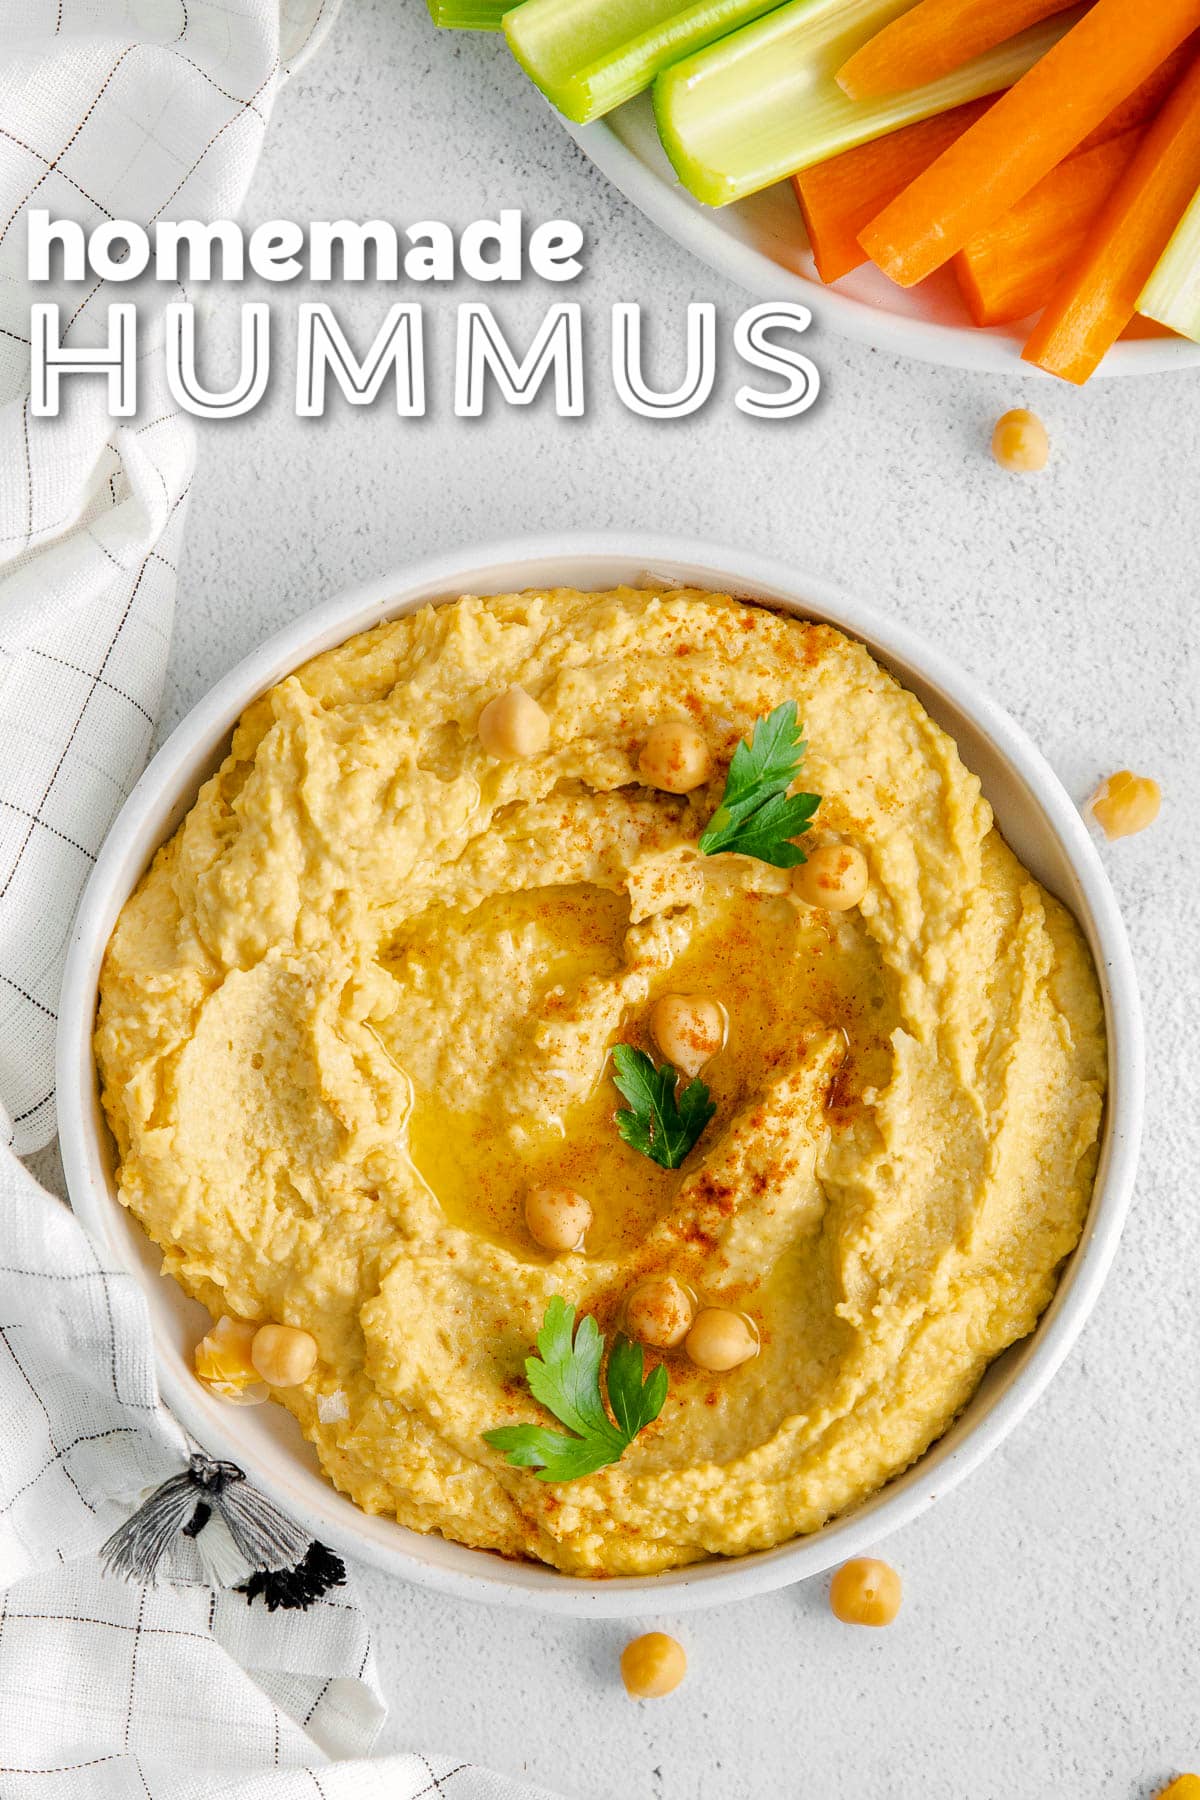 hummus in shallow white bowl with carrots and celery on a plate next to it. title overlay at top of image.